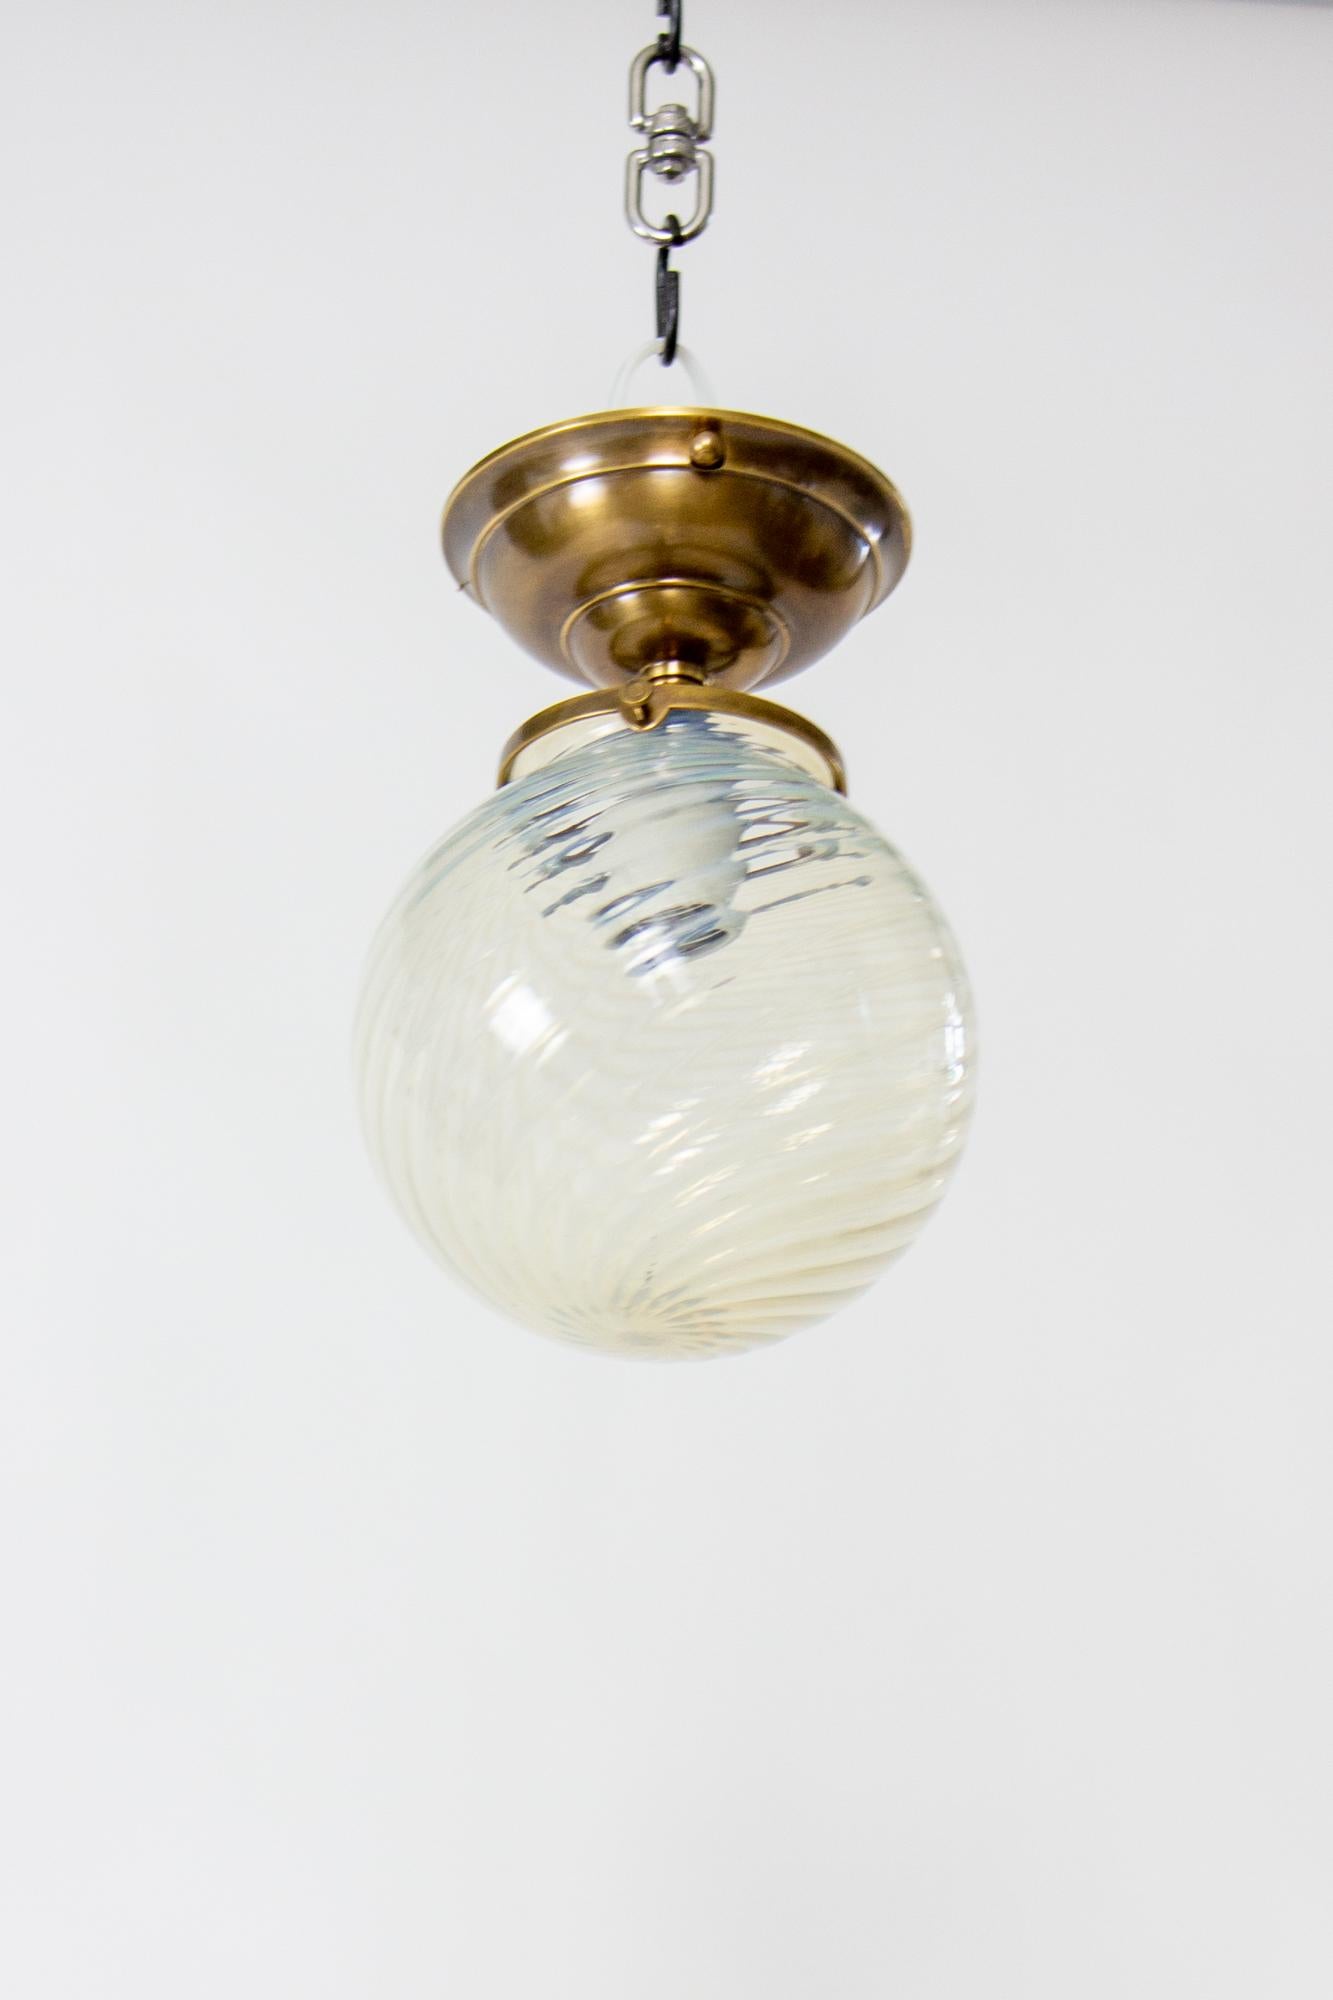 Opalescent globe flush mount light fixture. Glass is late 19th Century blown glass, carrying evidence of the original glass blowing process in the tip of the swirl pattern. The glass is clear and opal, and in some light takes on a blueish tone. It